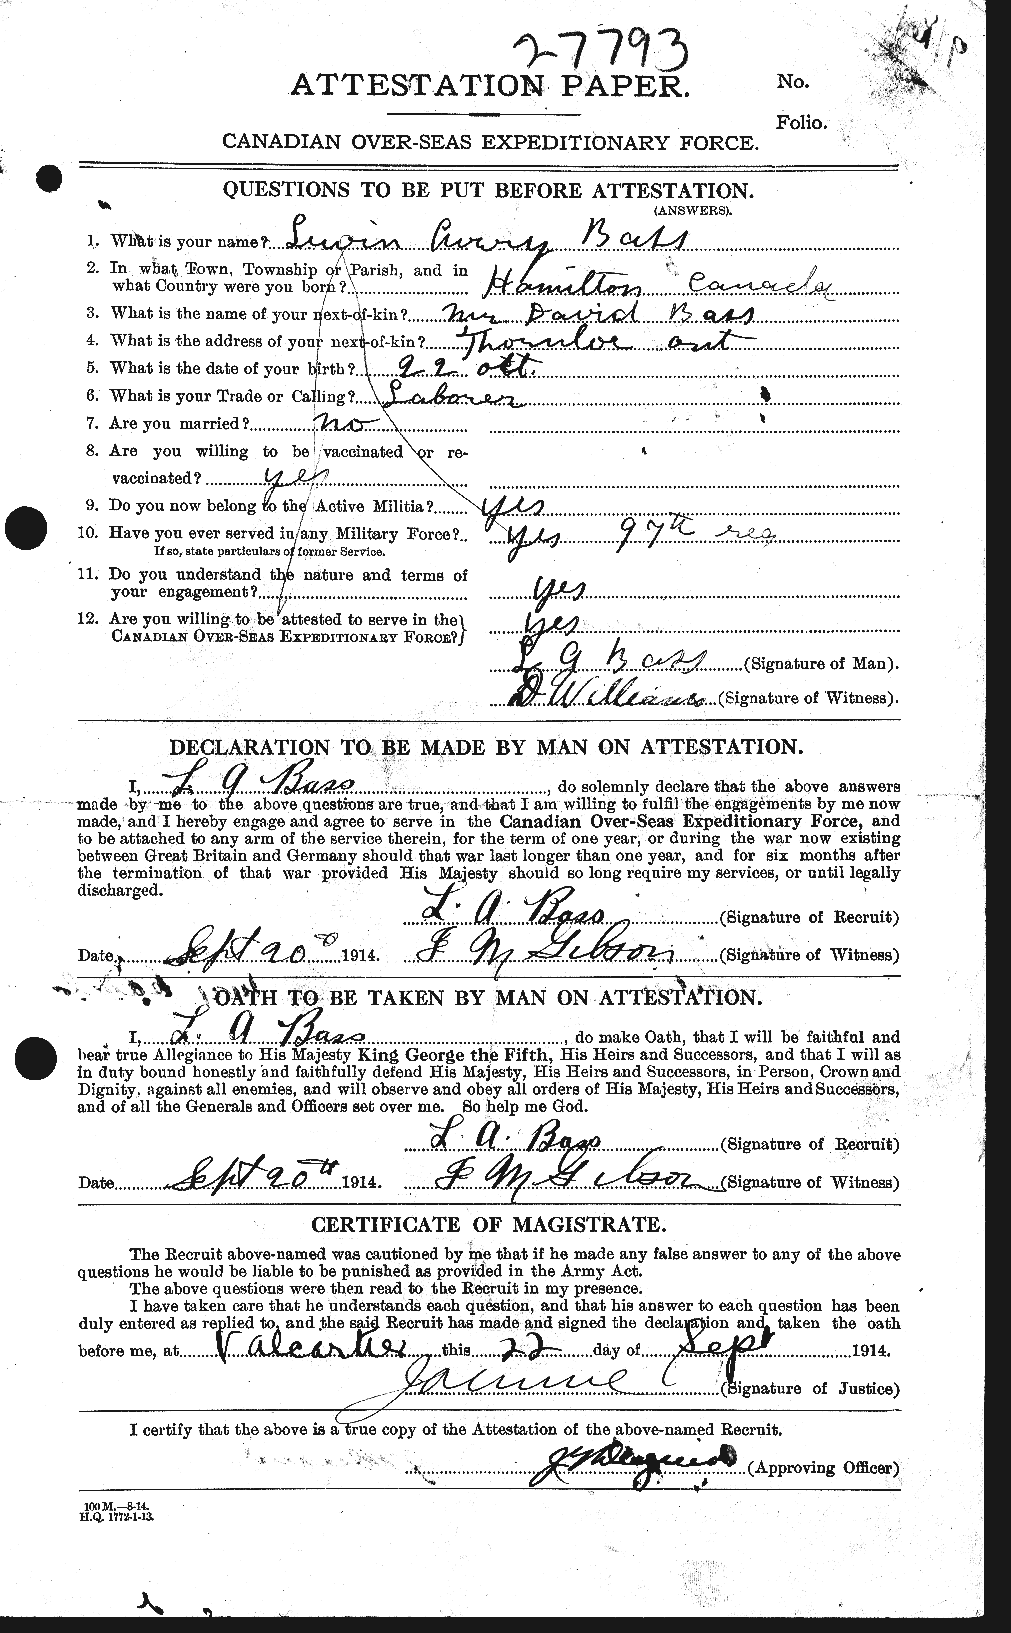 Personnel Records of the First World War - CEF 221107a